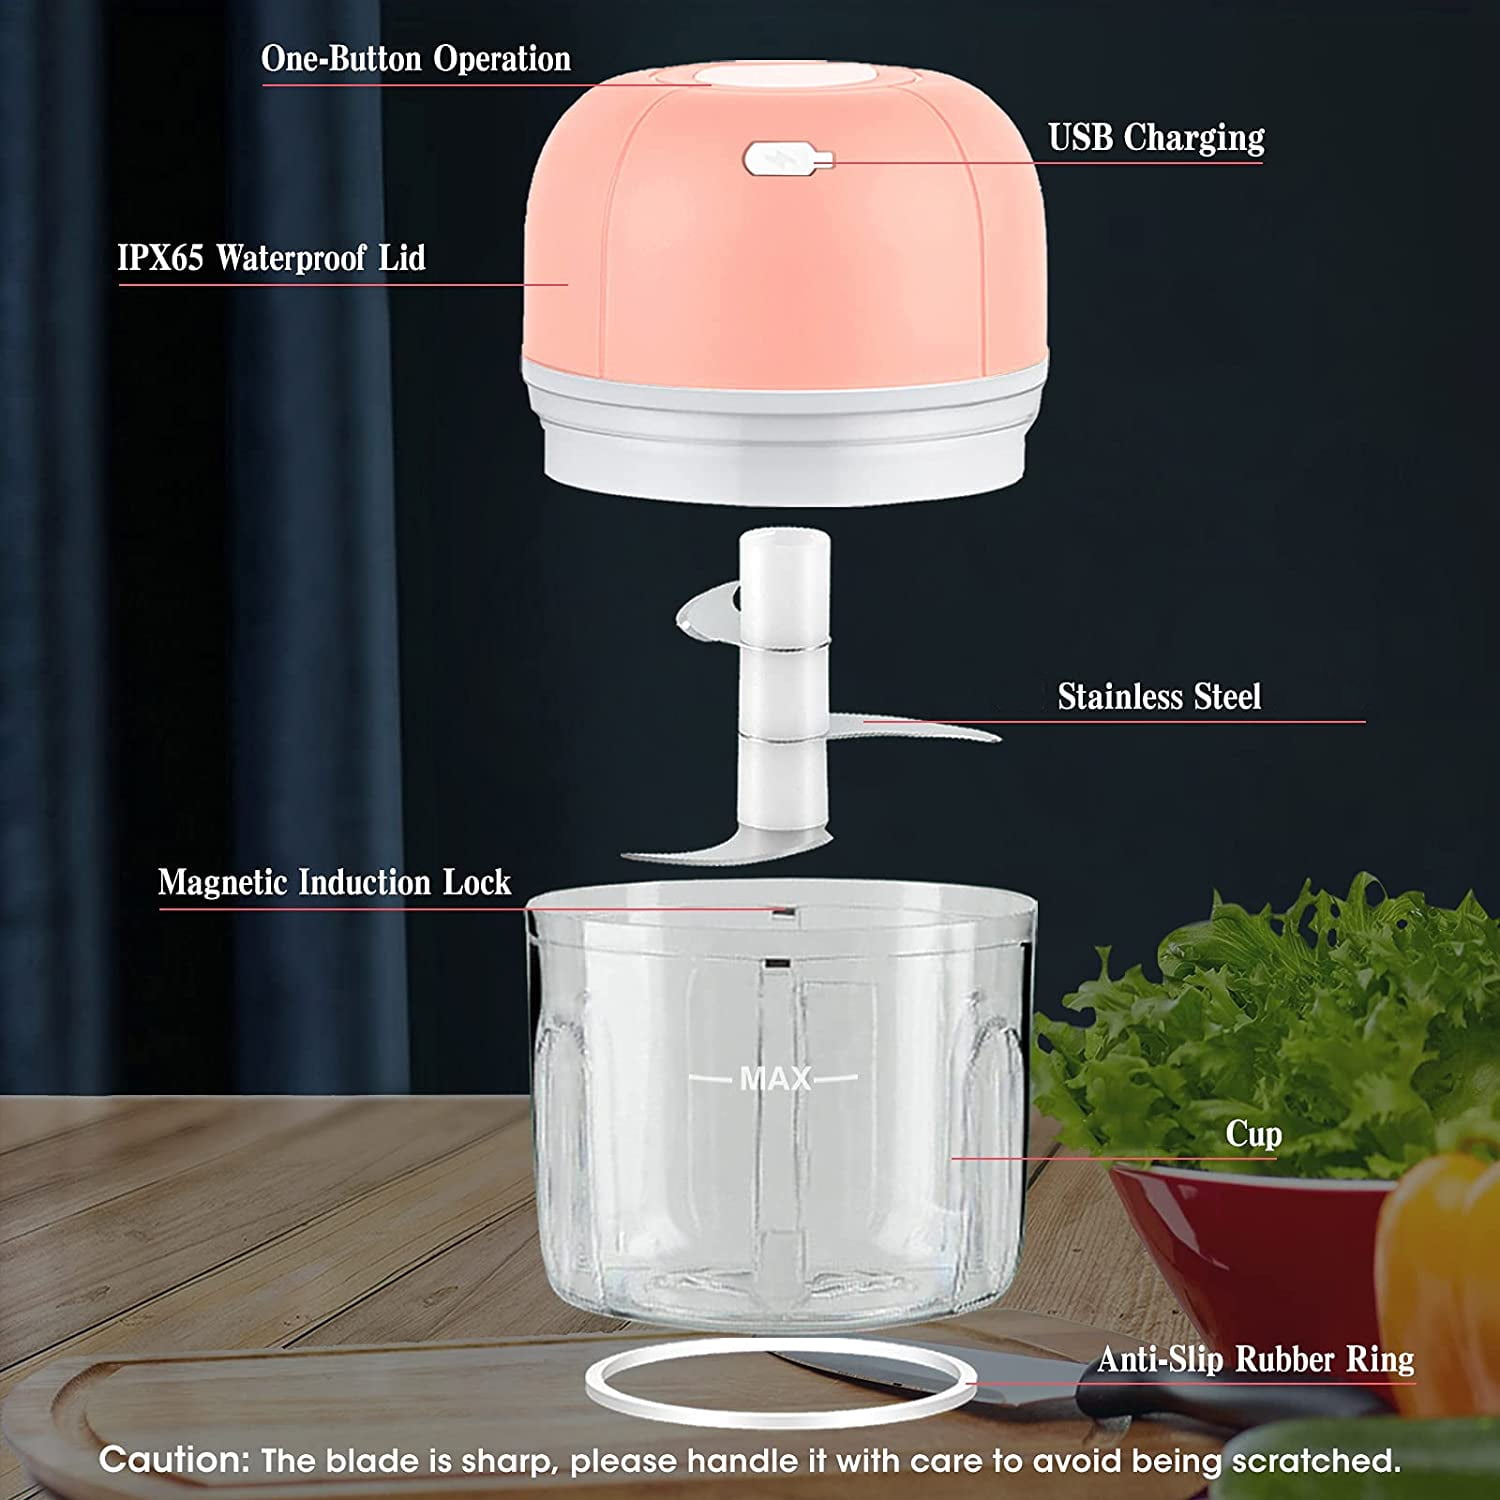 Baby Food Blender Cordless Electric Household Portable Mini Meat Grinder  Mixer